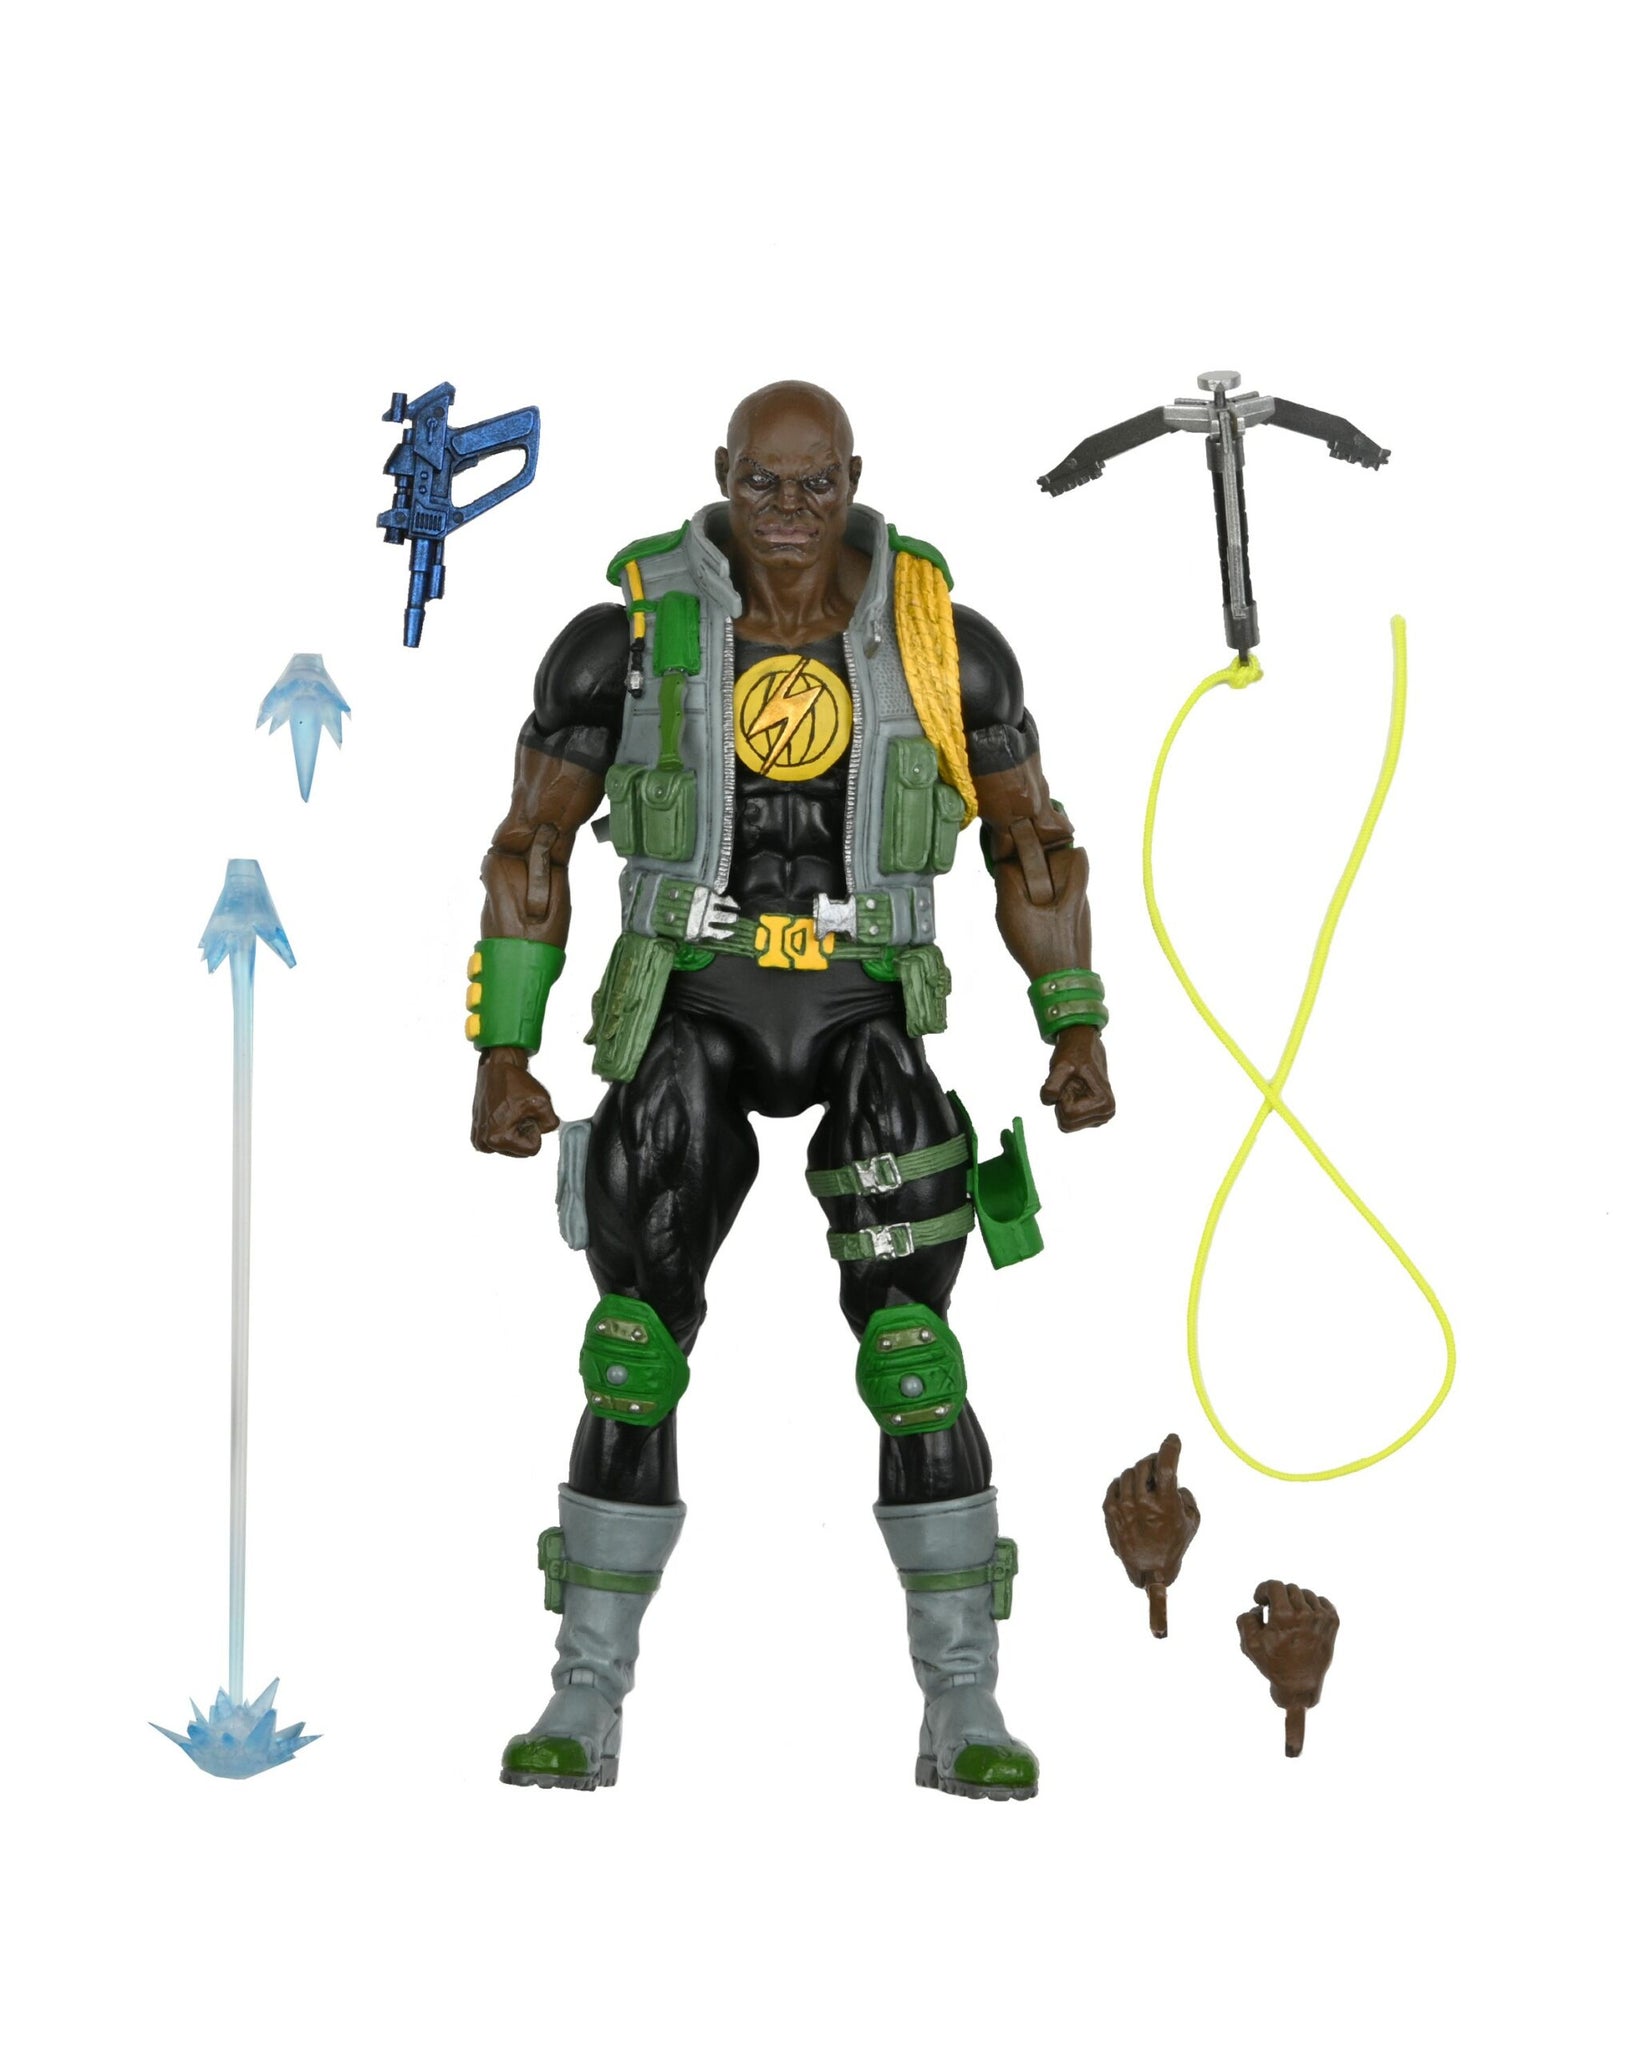 King Features 7″ Scale Action Figures Defenders of the Earth Series 2 Lothar